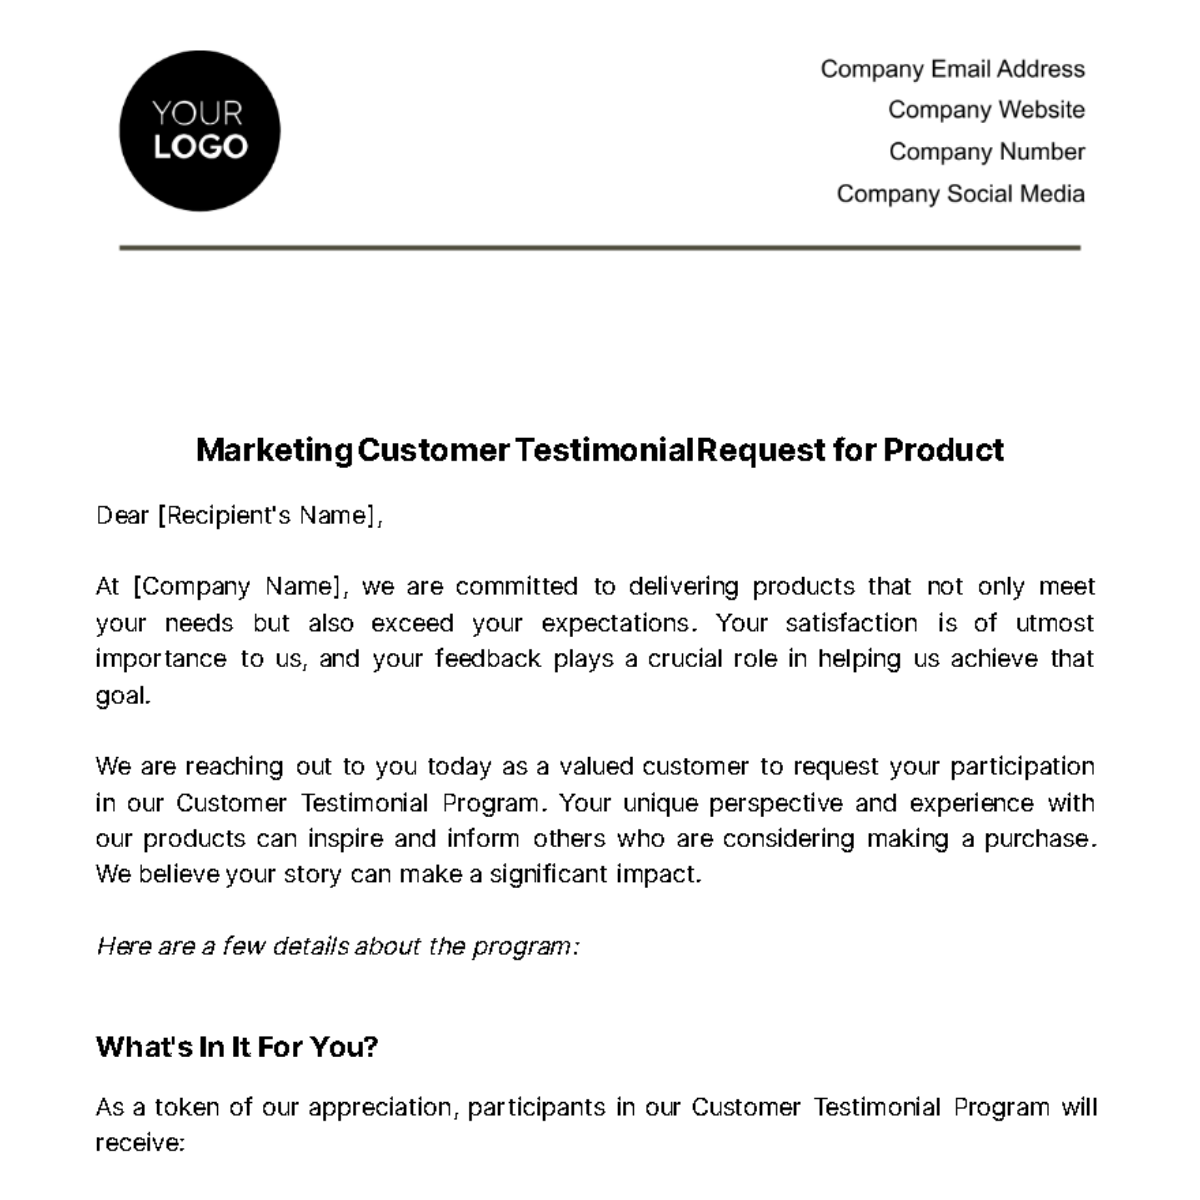 Marketing Customer Testimonial Request for Product Template